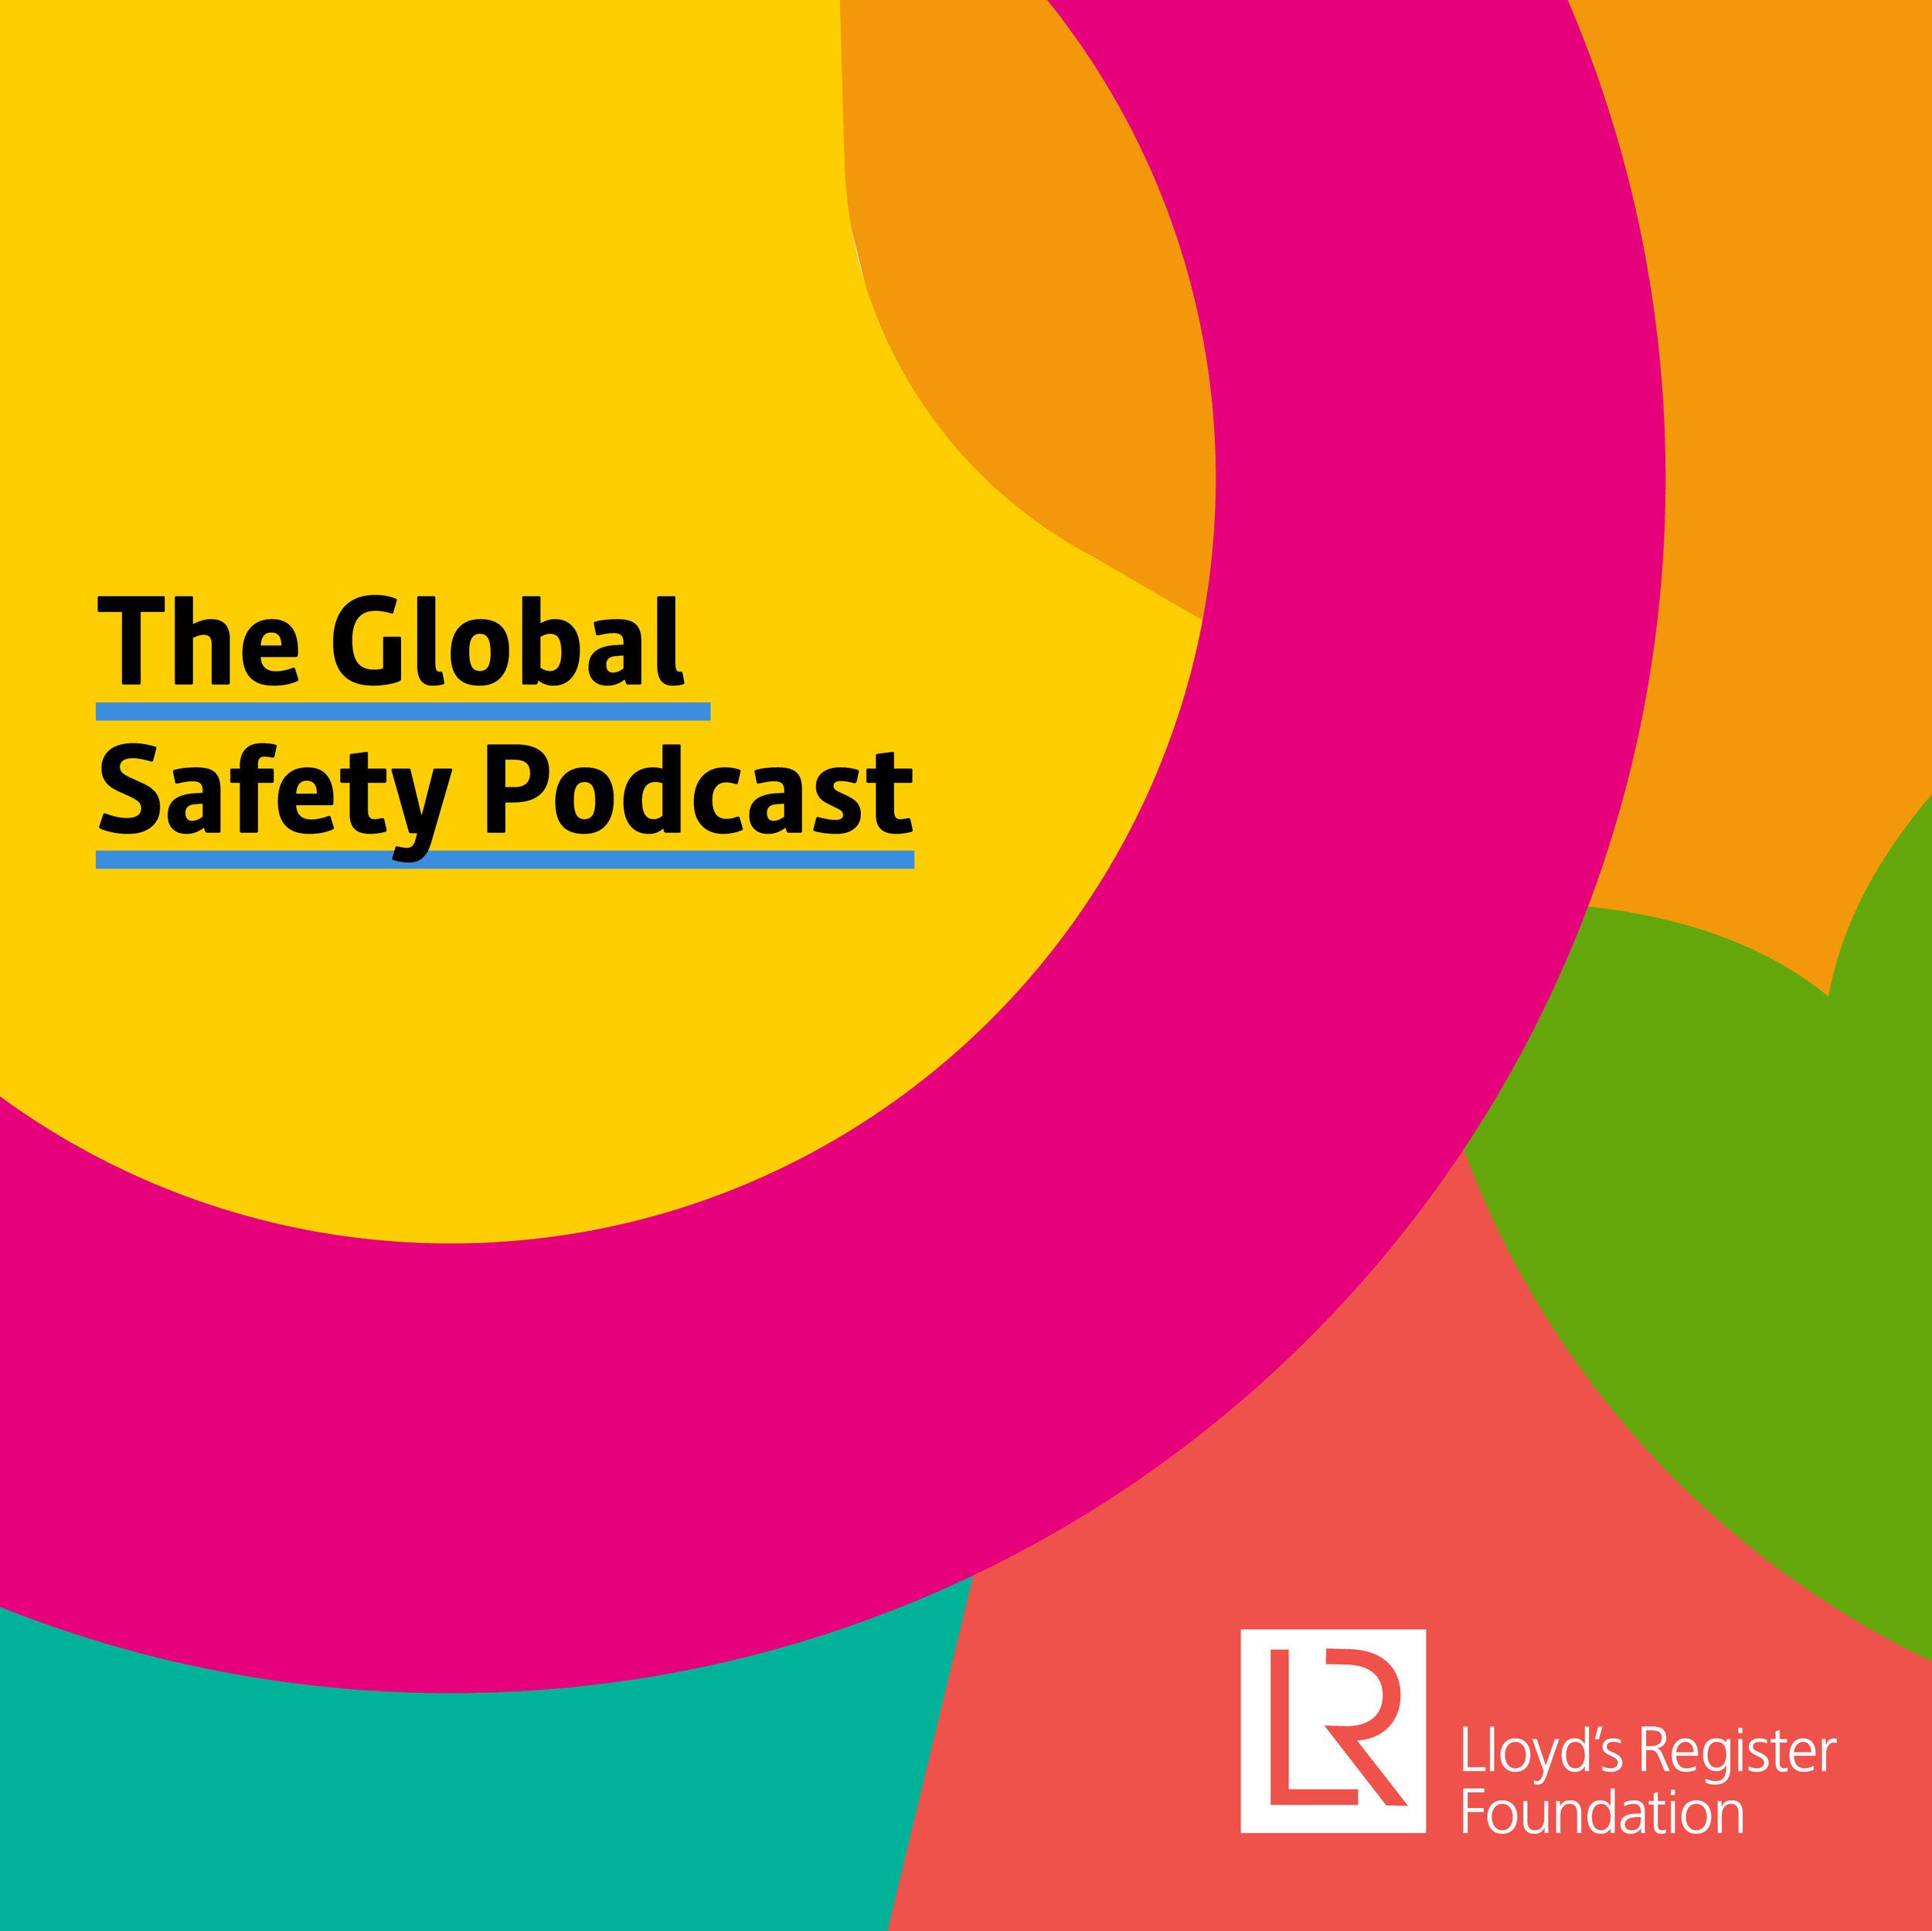 The Global Safety Podcast